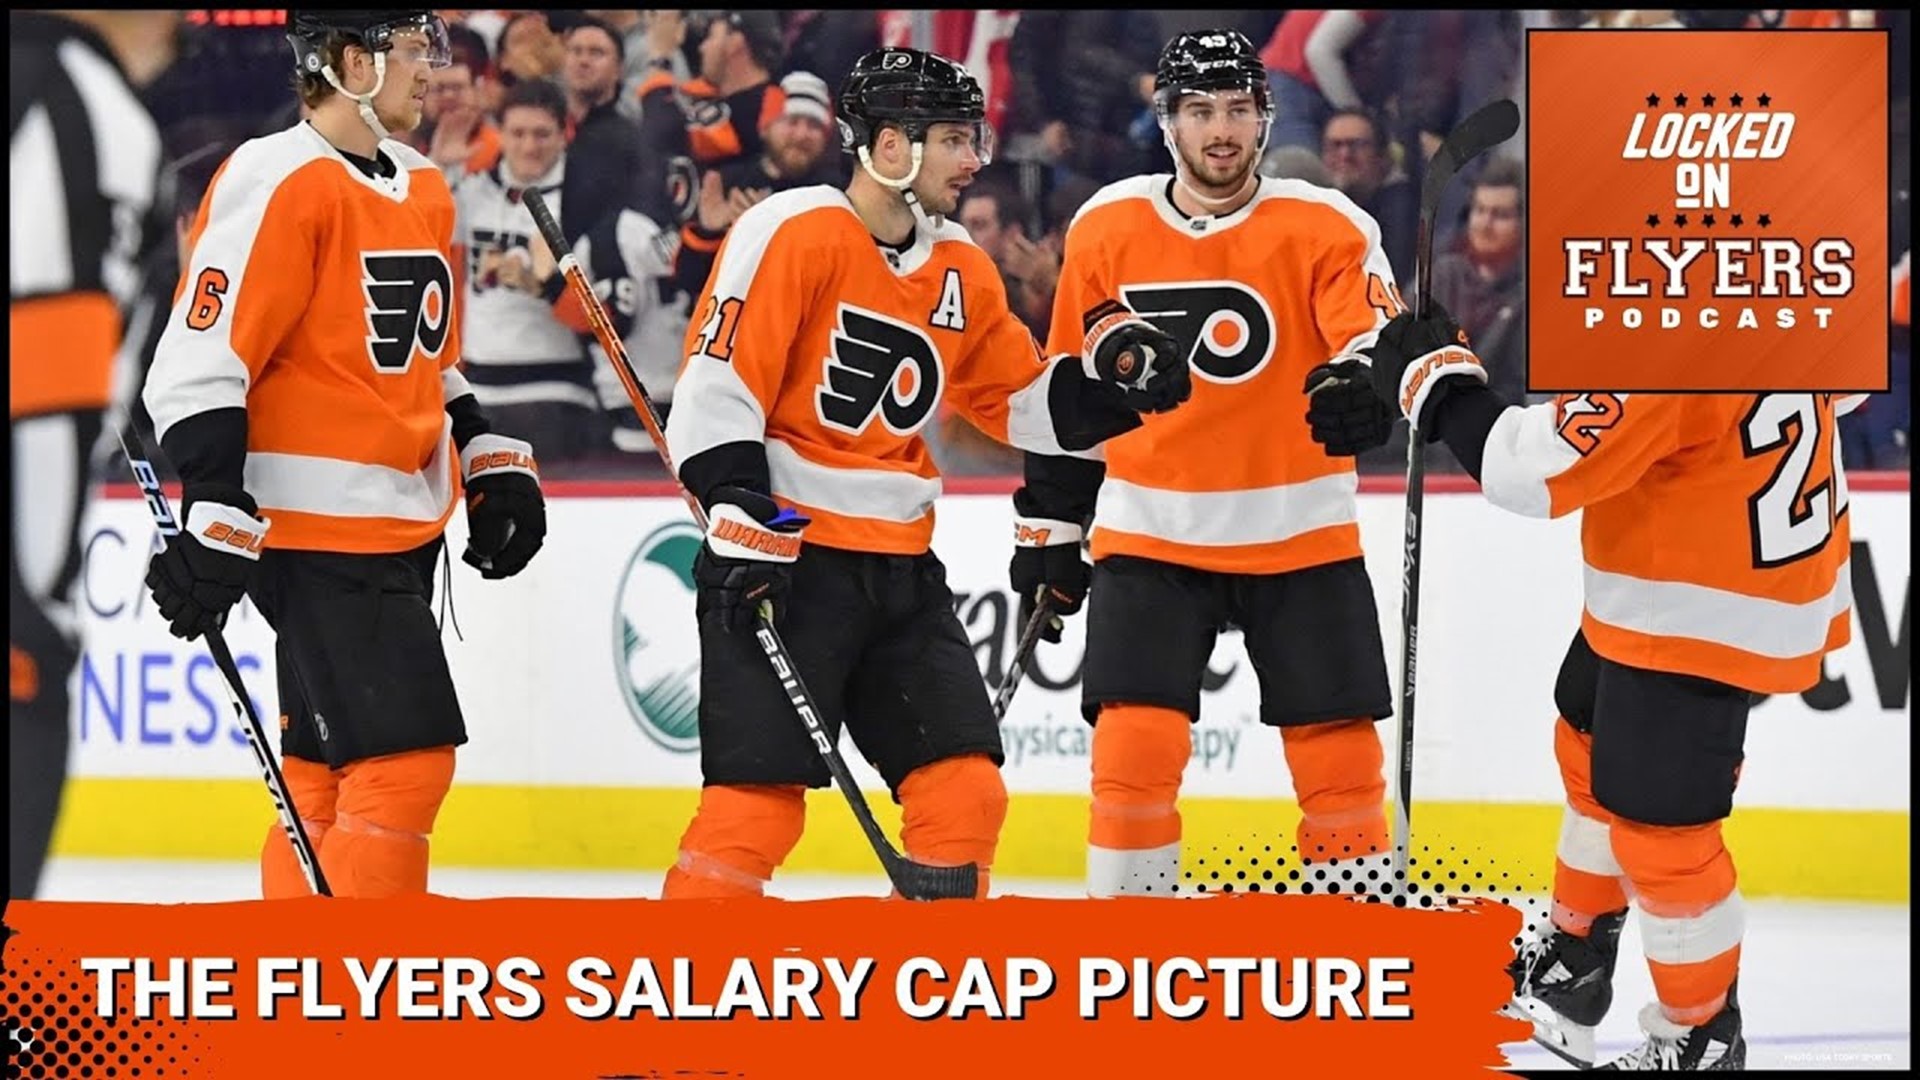 We examine the Salary Cap picture for the Flyers next season, player by player, and asks how the Flyers can set themselves up to make better moves.